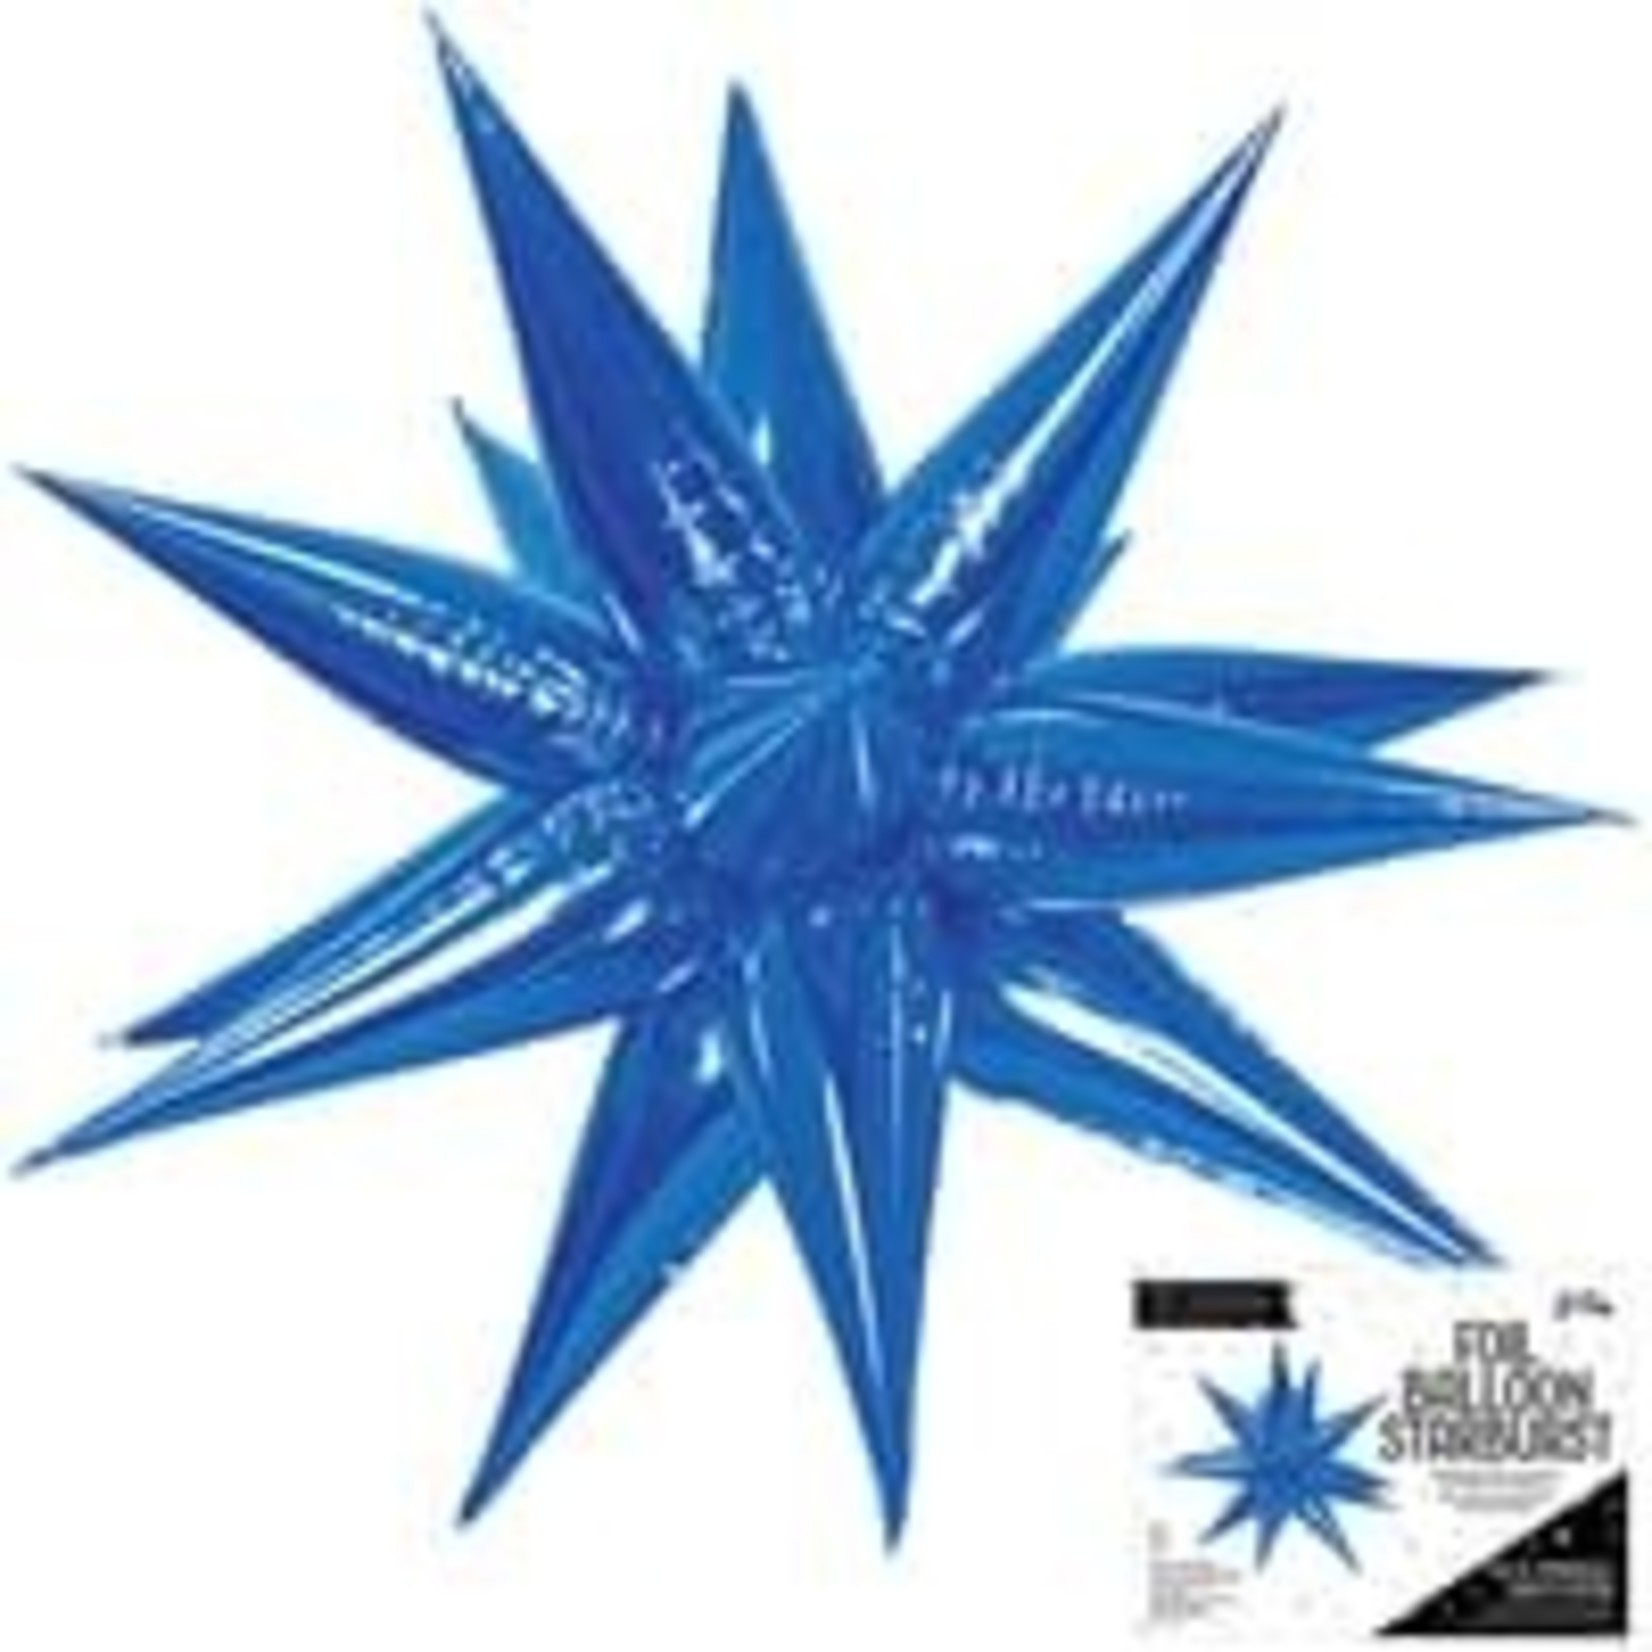 La Fete 26" Blue Starburst Balloon - 1ct. (Air-Fill Only)